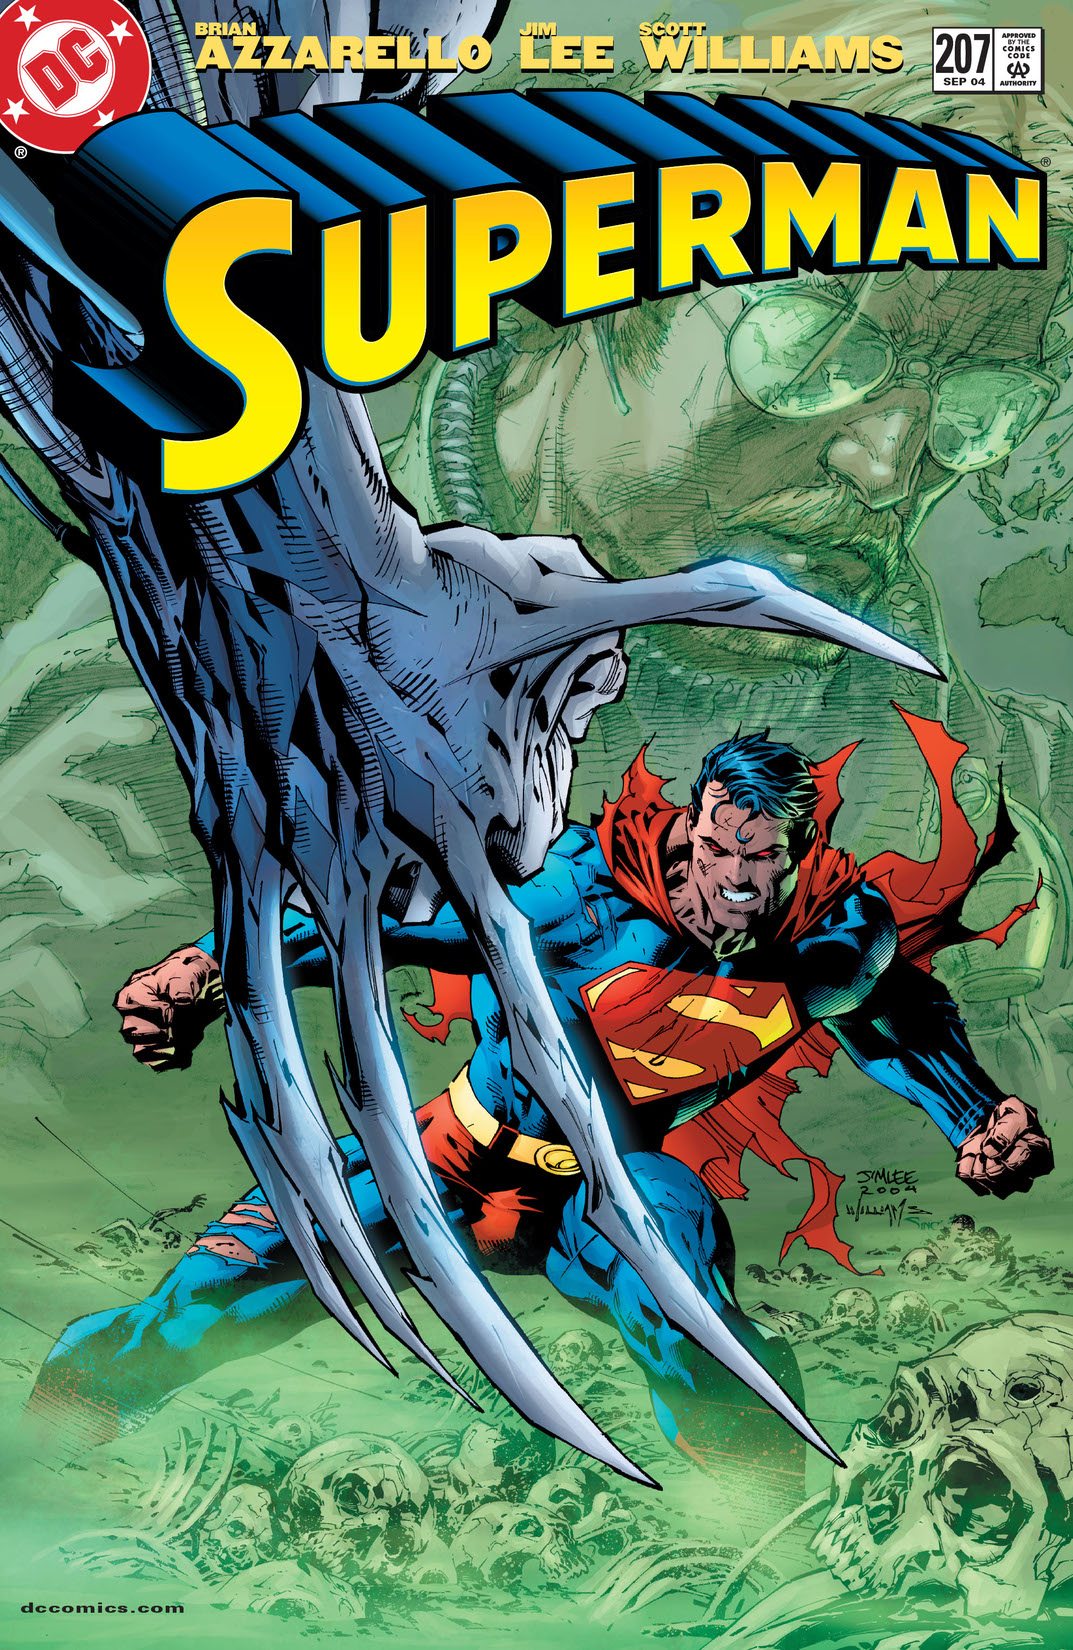 Superman (1986-) #207 preview images